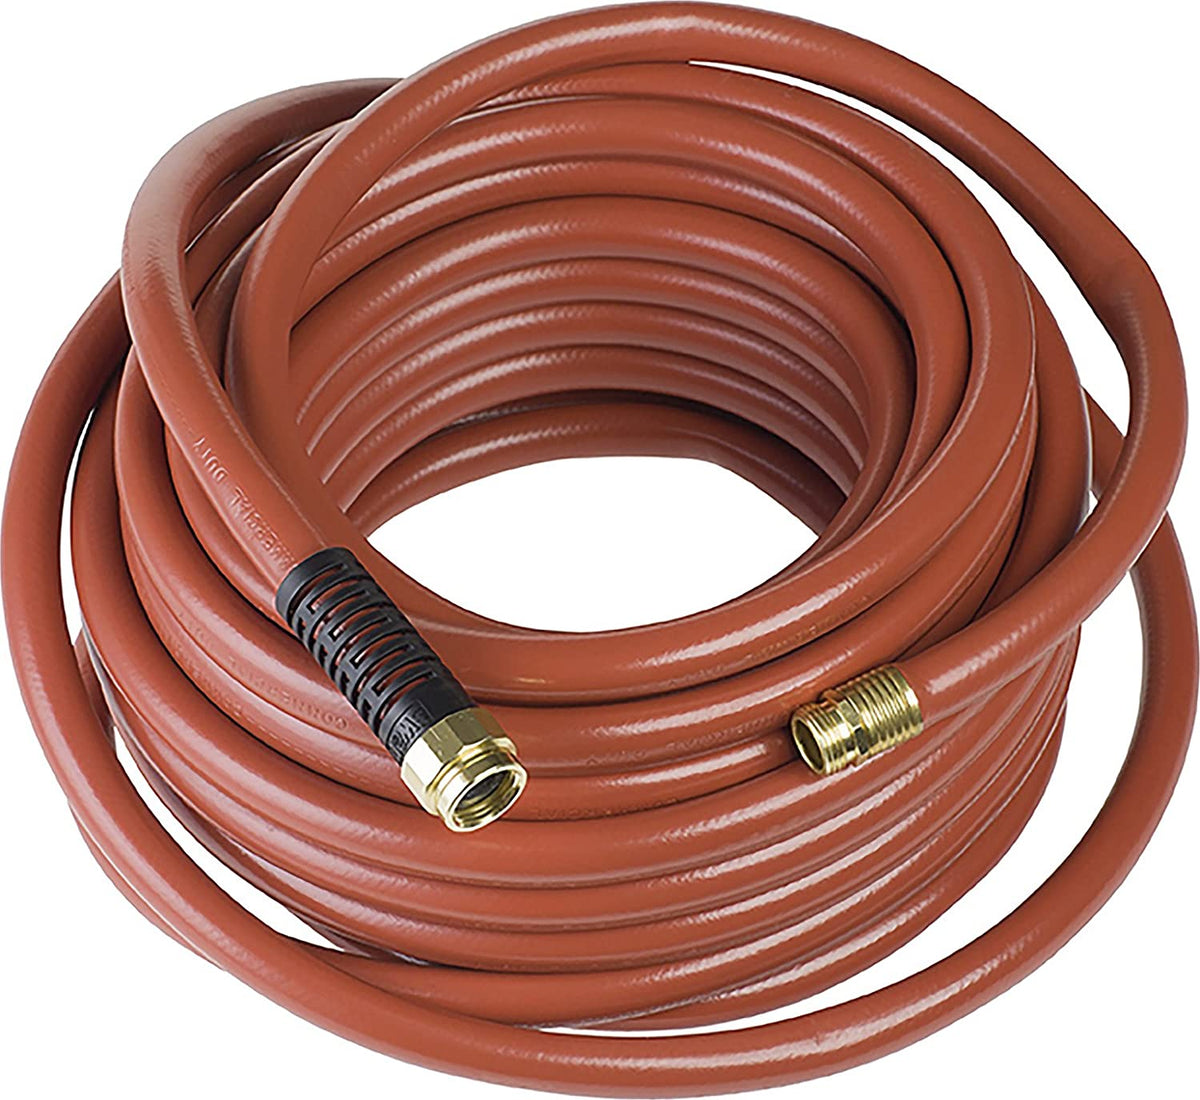 Swan SNCG34100 Contractor Plus Heavy-Duty Water Hose, 3/4"x100', Red